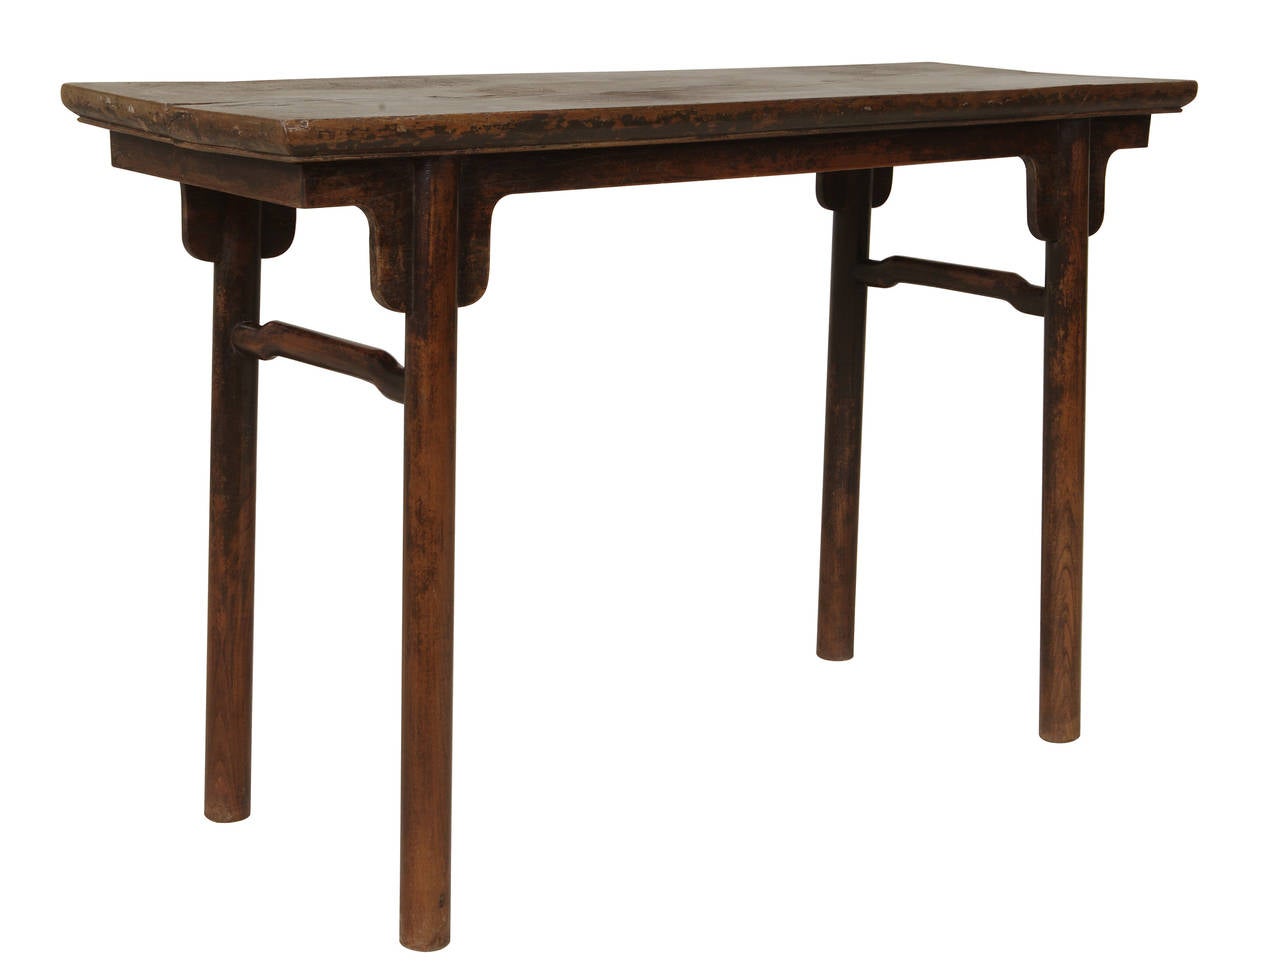 A jumu, or Southern Elmwood, wine table from Jiangsu Province from c. 1800 with stretchers on two sides.